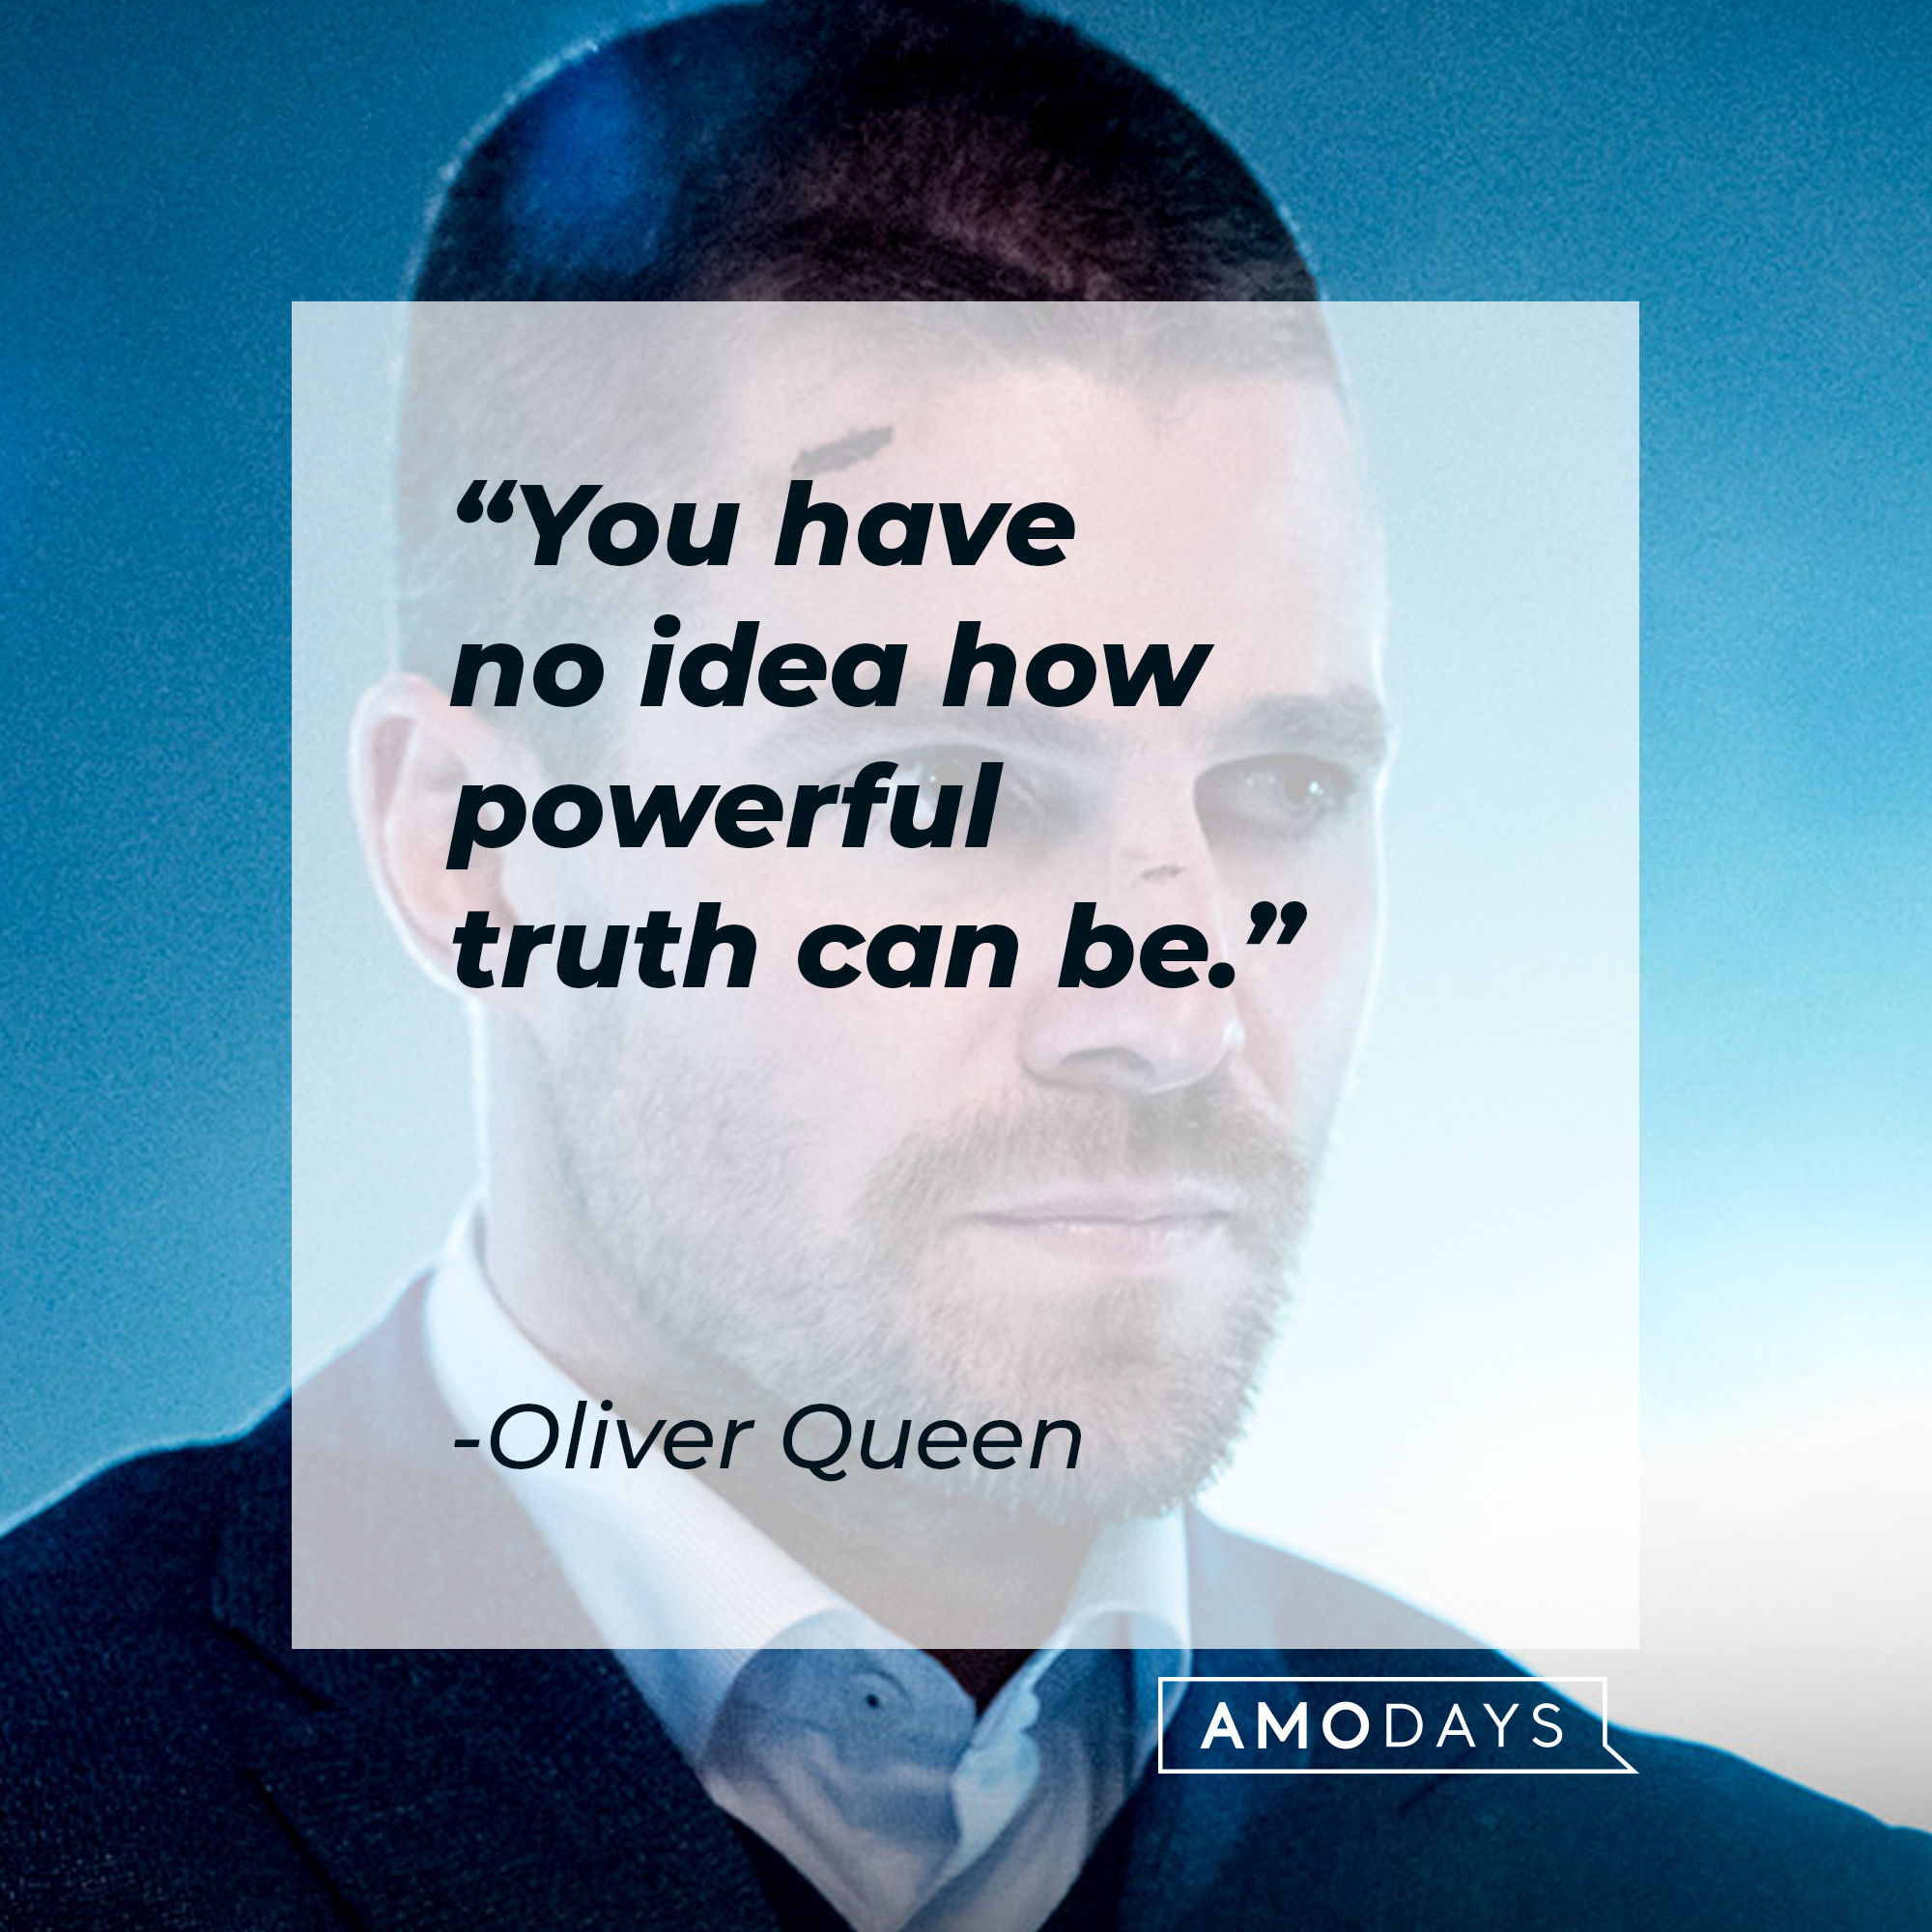 An image of Oliver Queen with his quote: “You have no idea how powerful truth can be.”  |  Source: facebook.com/CWArrow